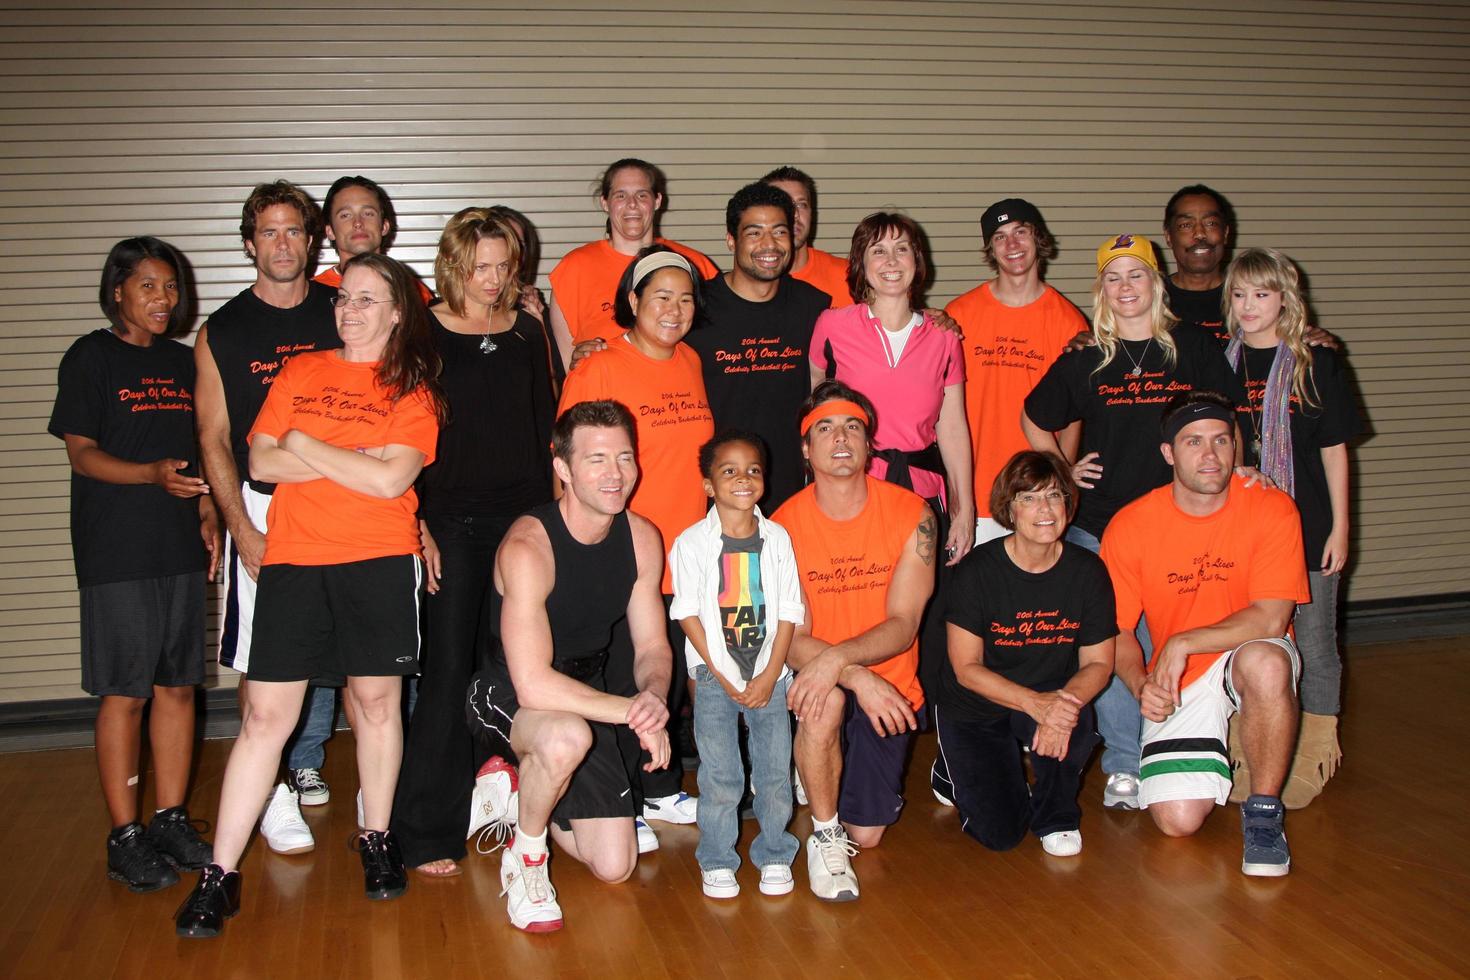 Game Participants at the 20th James Reynolds Days of Our Lives Basketball Game at South Pasadena High School in Pasadena, CA on May 29, 2009 photo